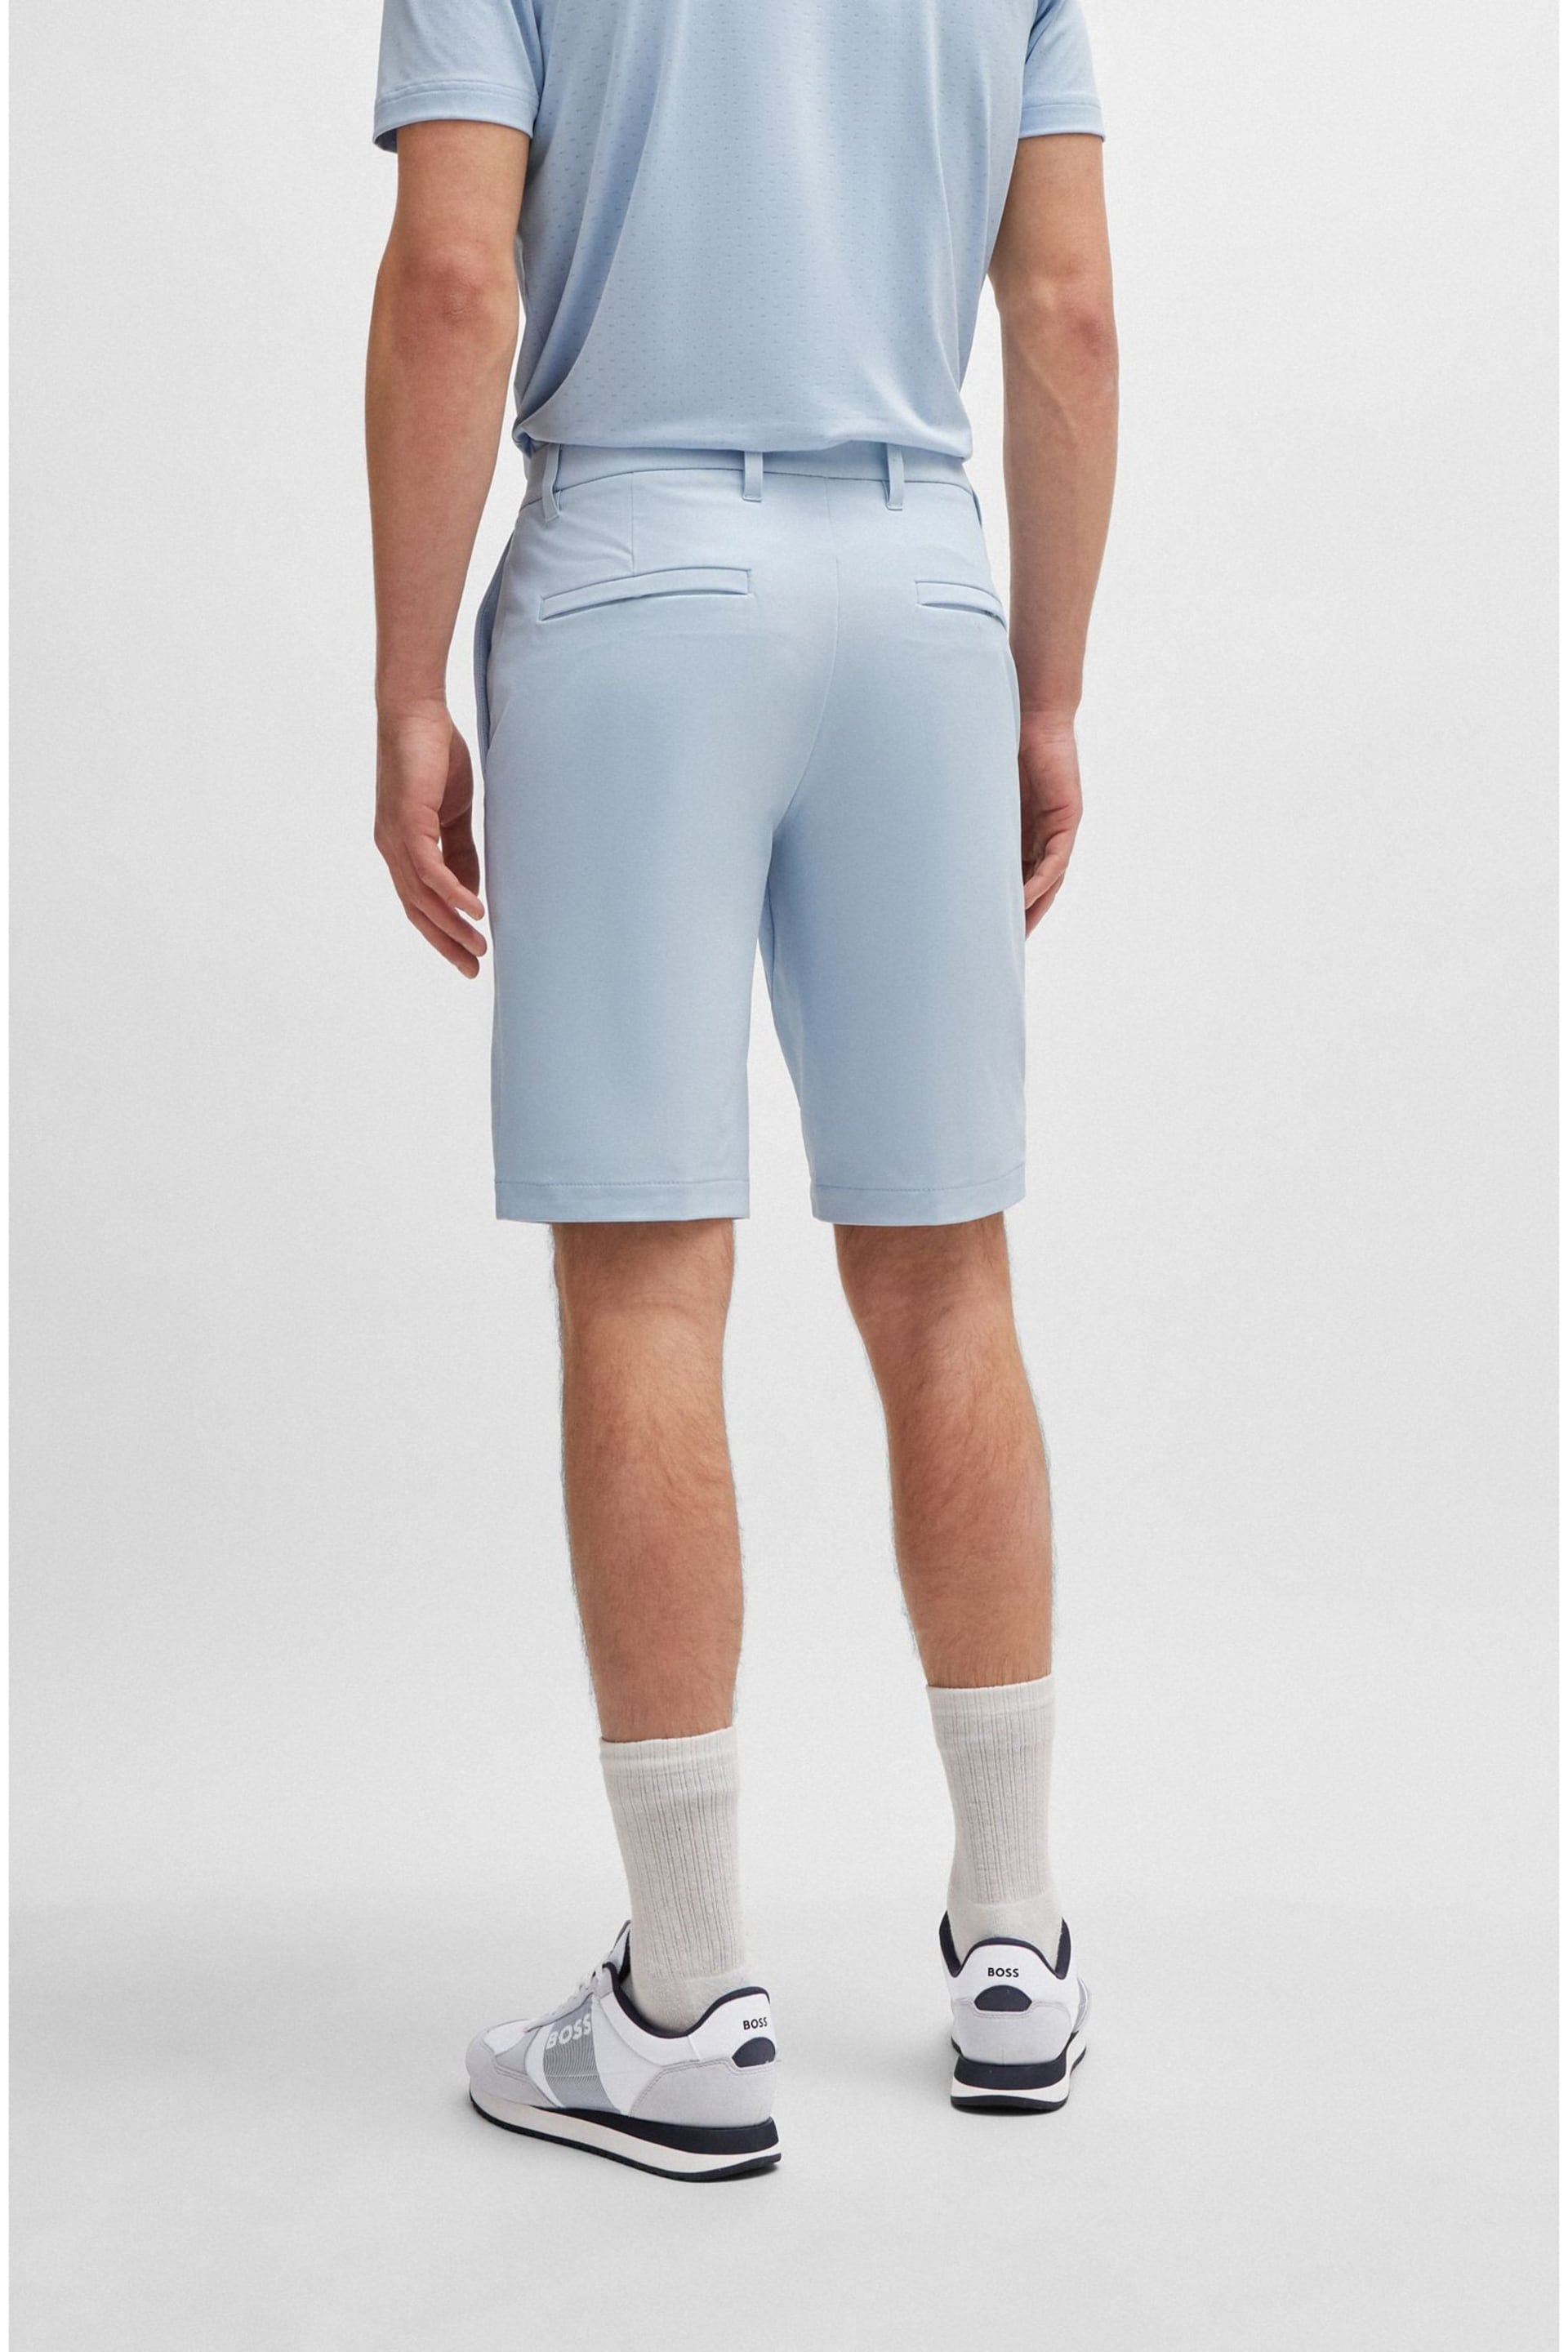 BOSS Light Blue Slim-Fit Shorts in Water-Repellent Easy-Iron Fabric - Image 2 of 5